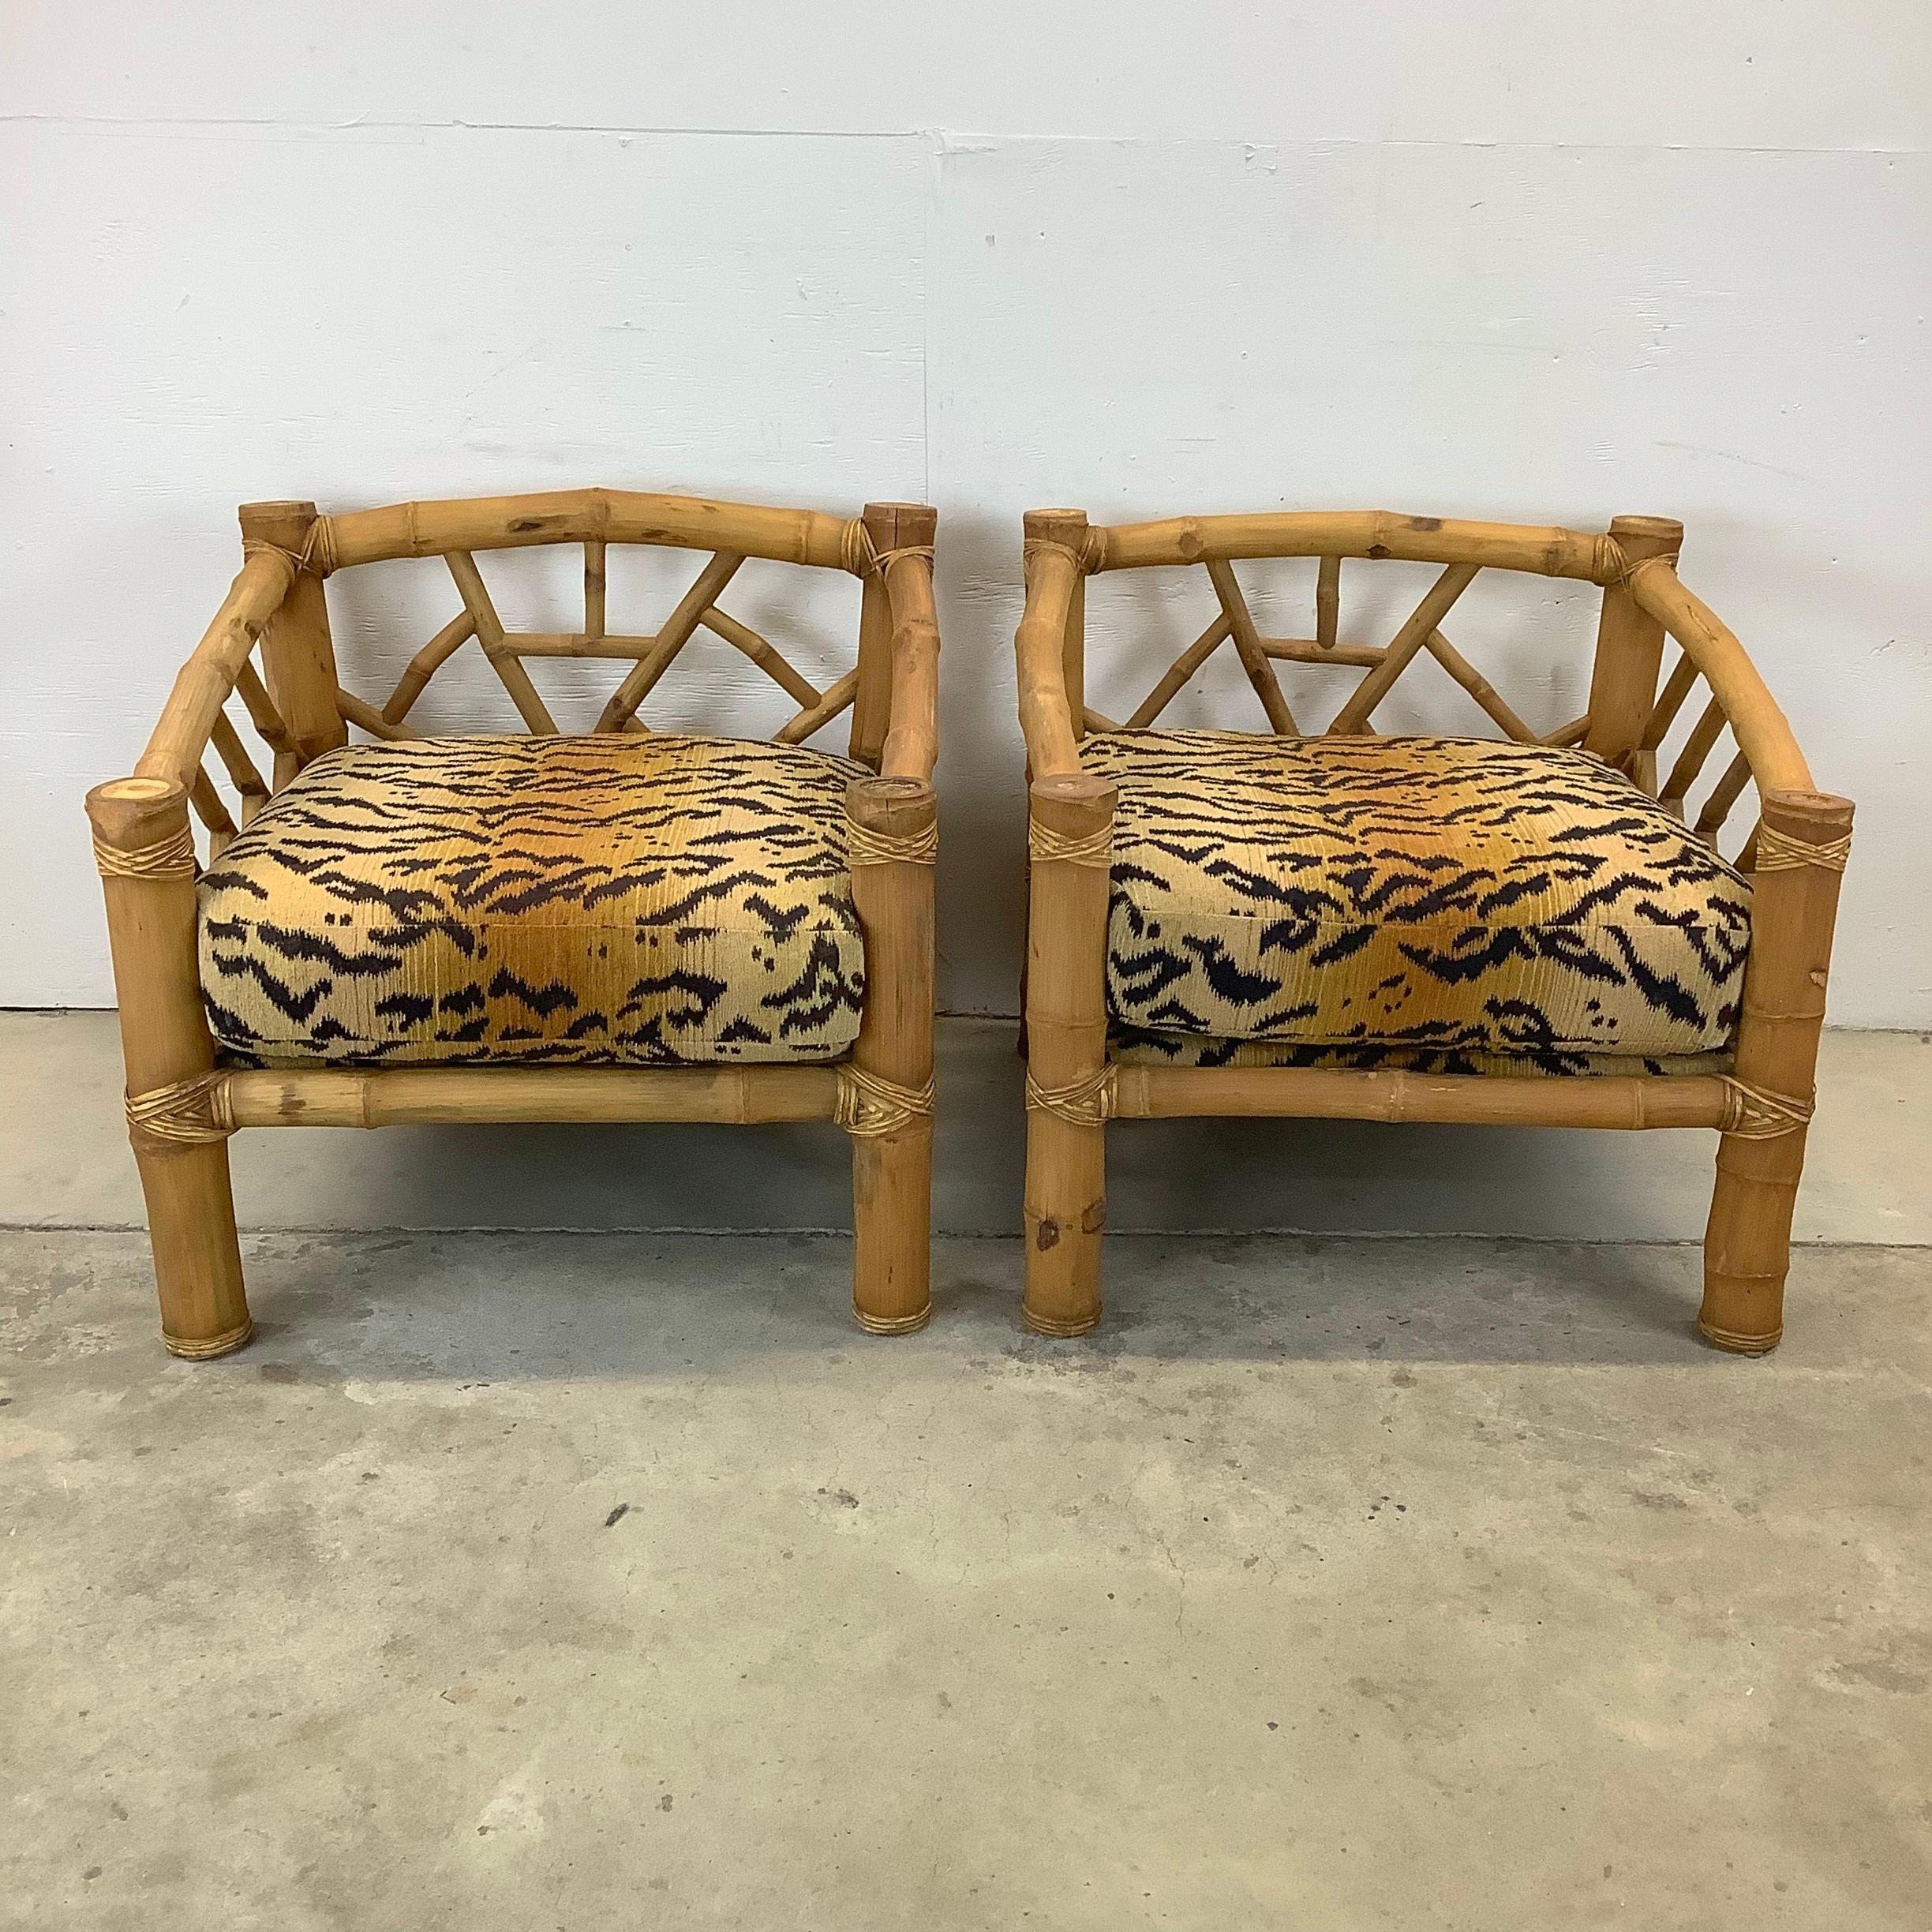 20th Century Pair Vintage Bamboo Armchairs & Ottoman in Tiger Print